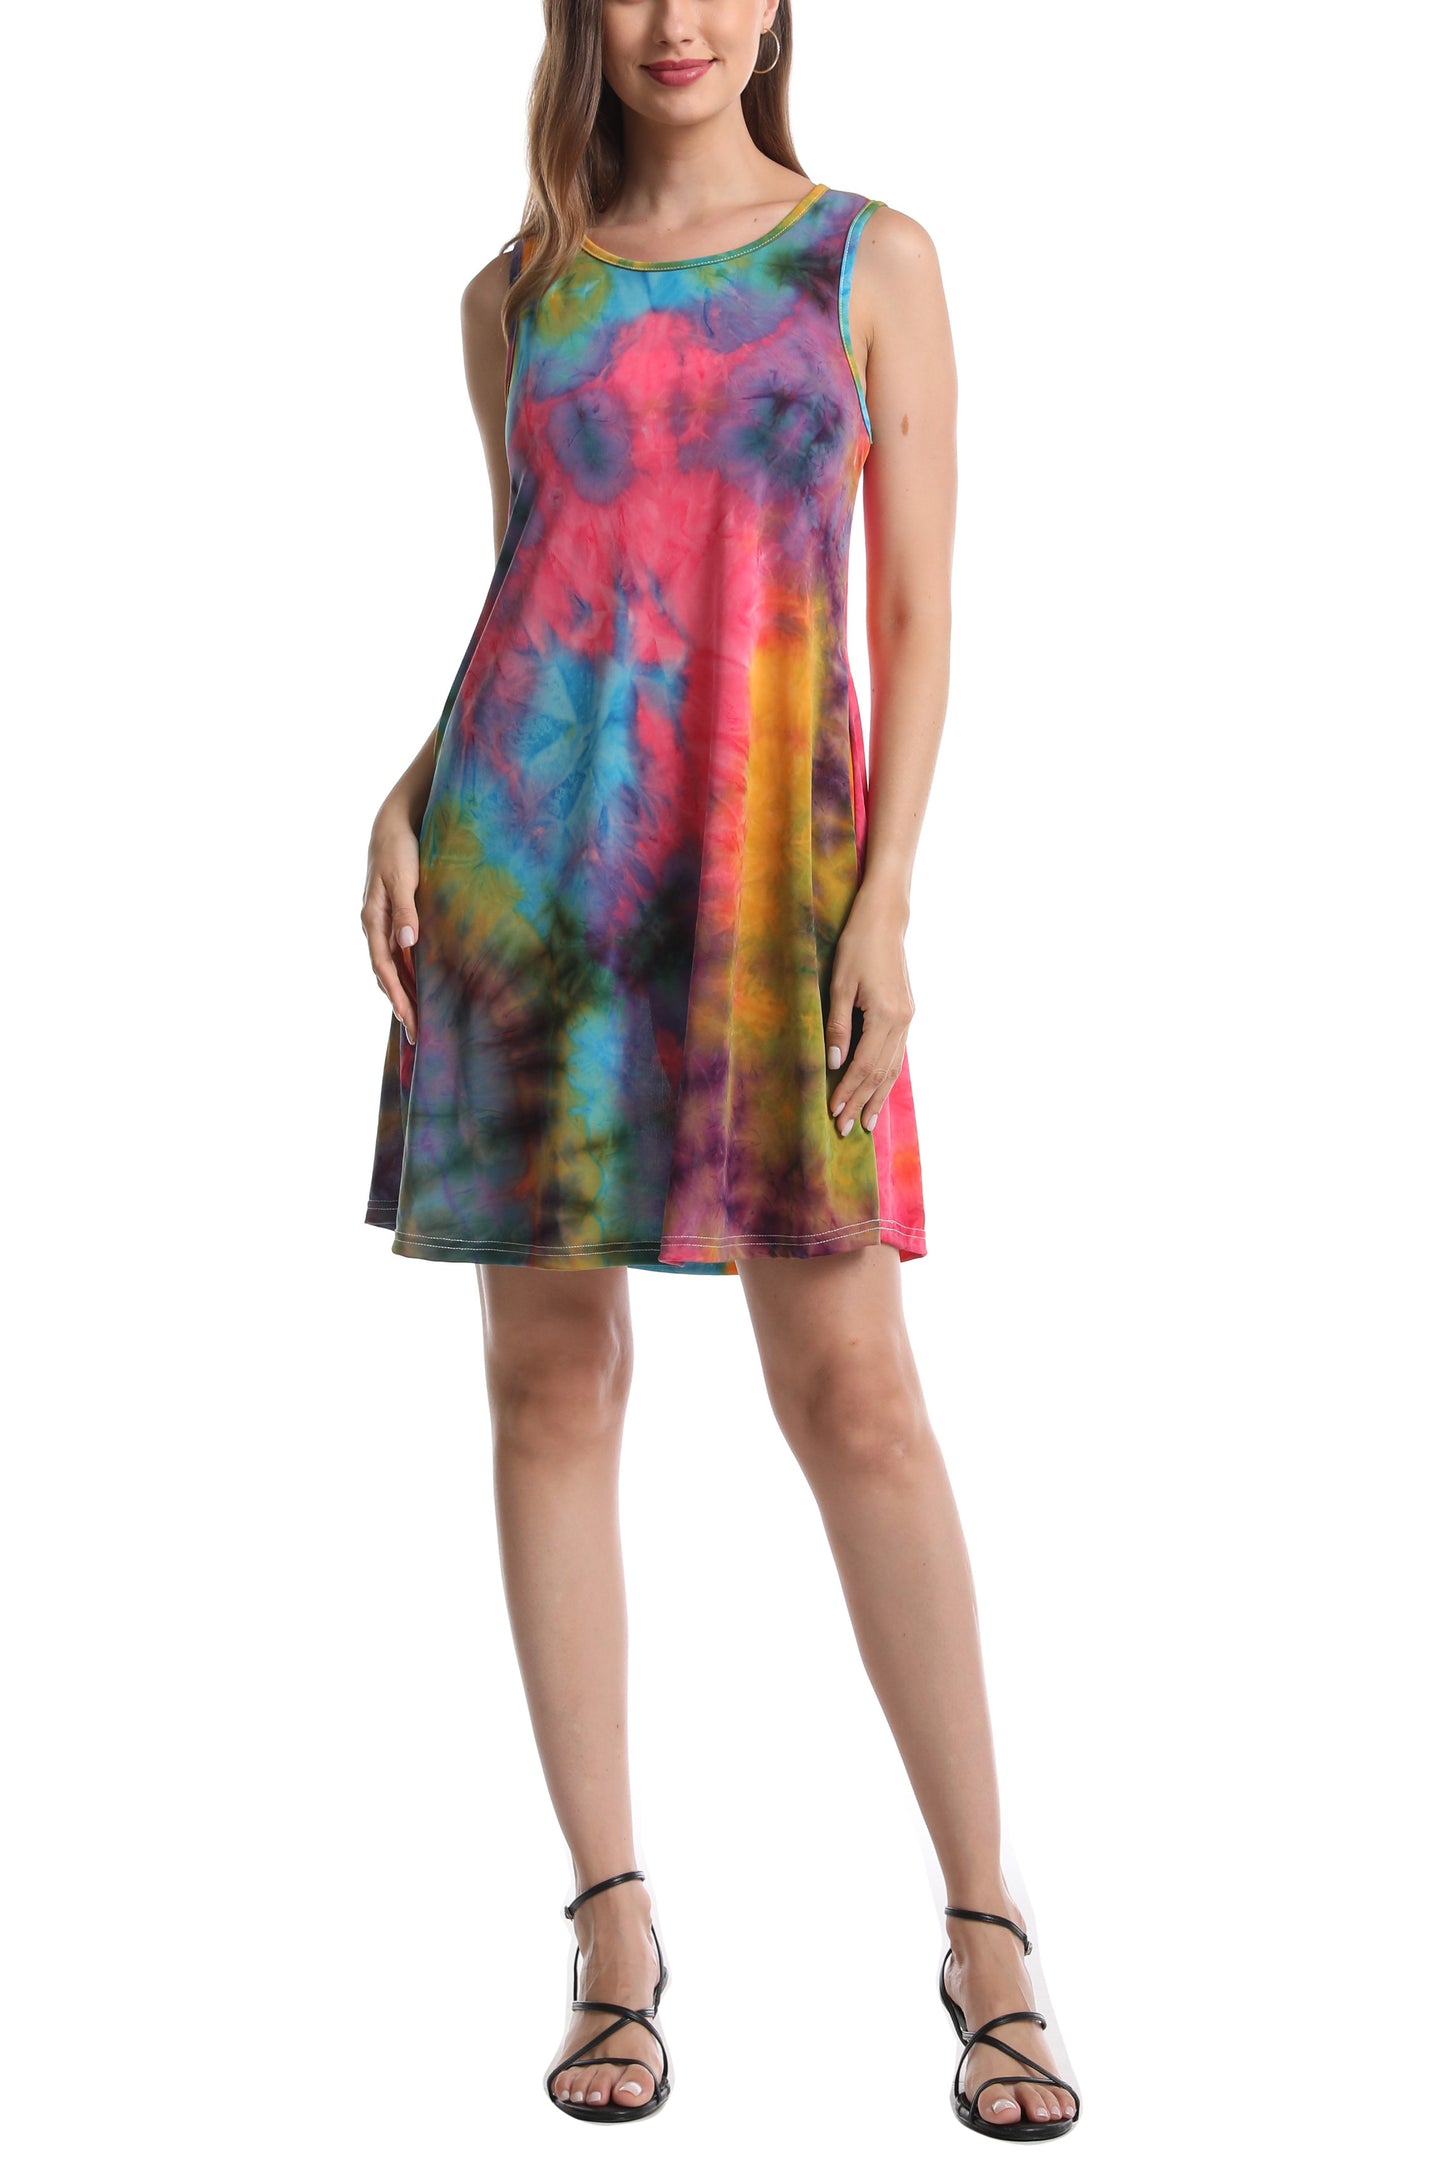 Women's Sleeveless Loose Watercolor Dresses T Shirt Tank Casual Short Dress with Pockets